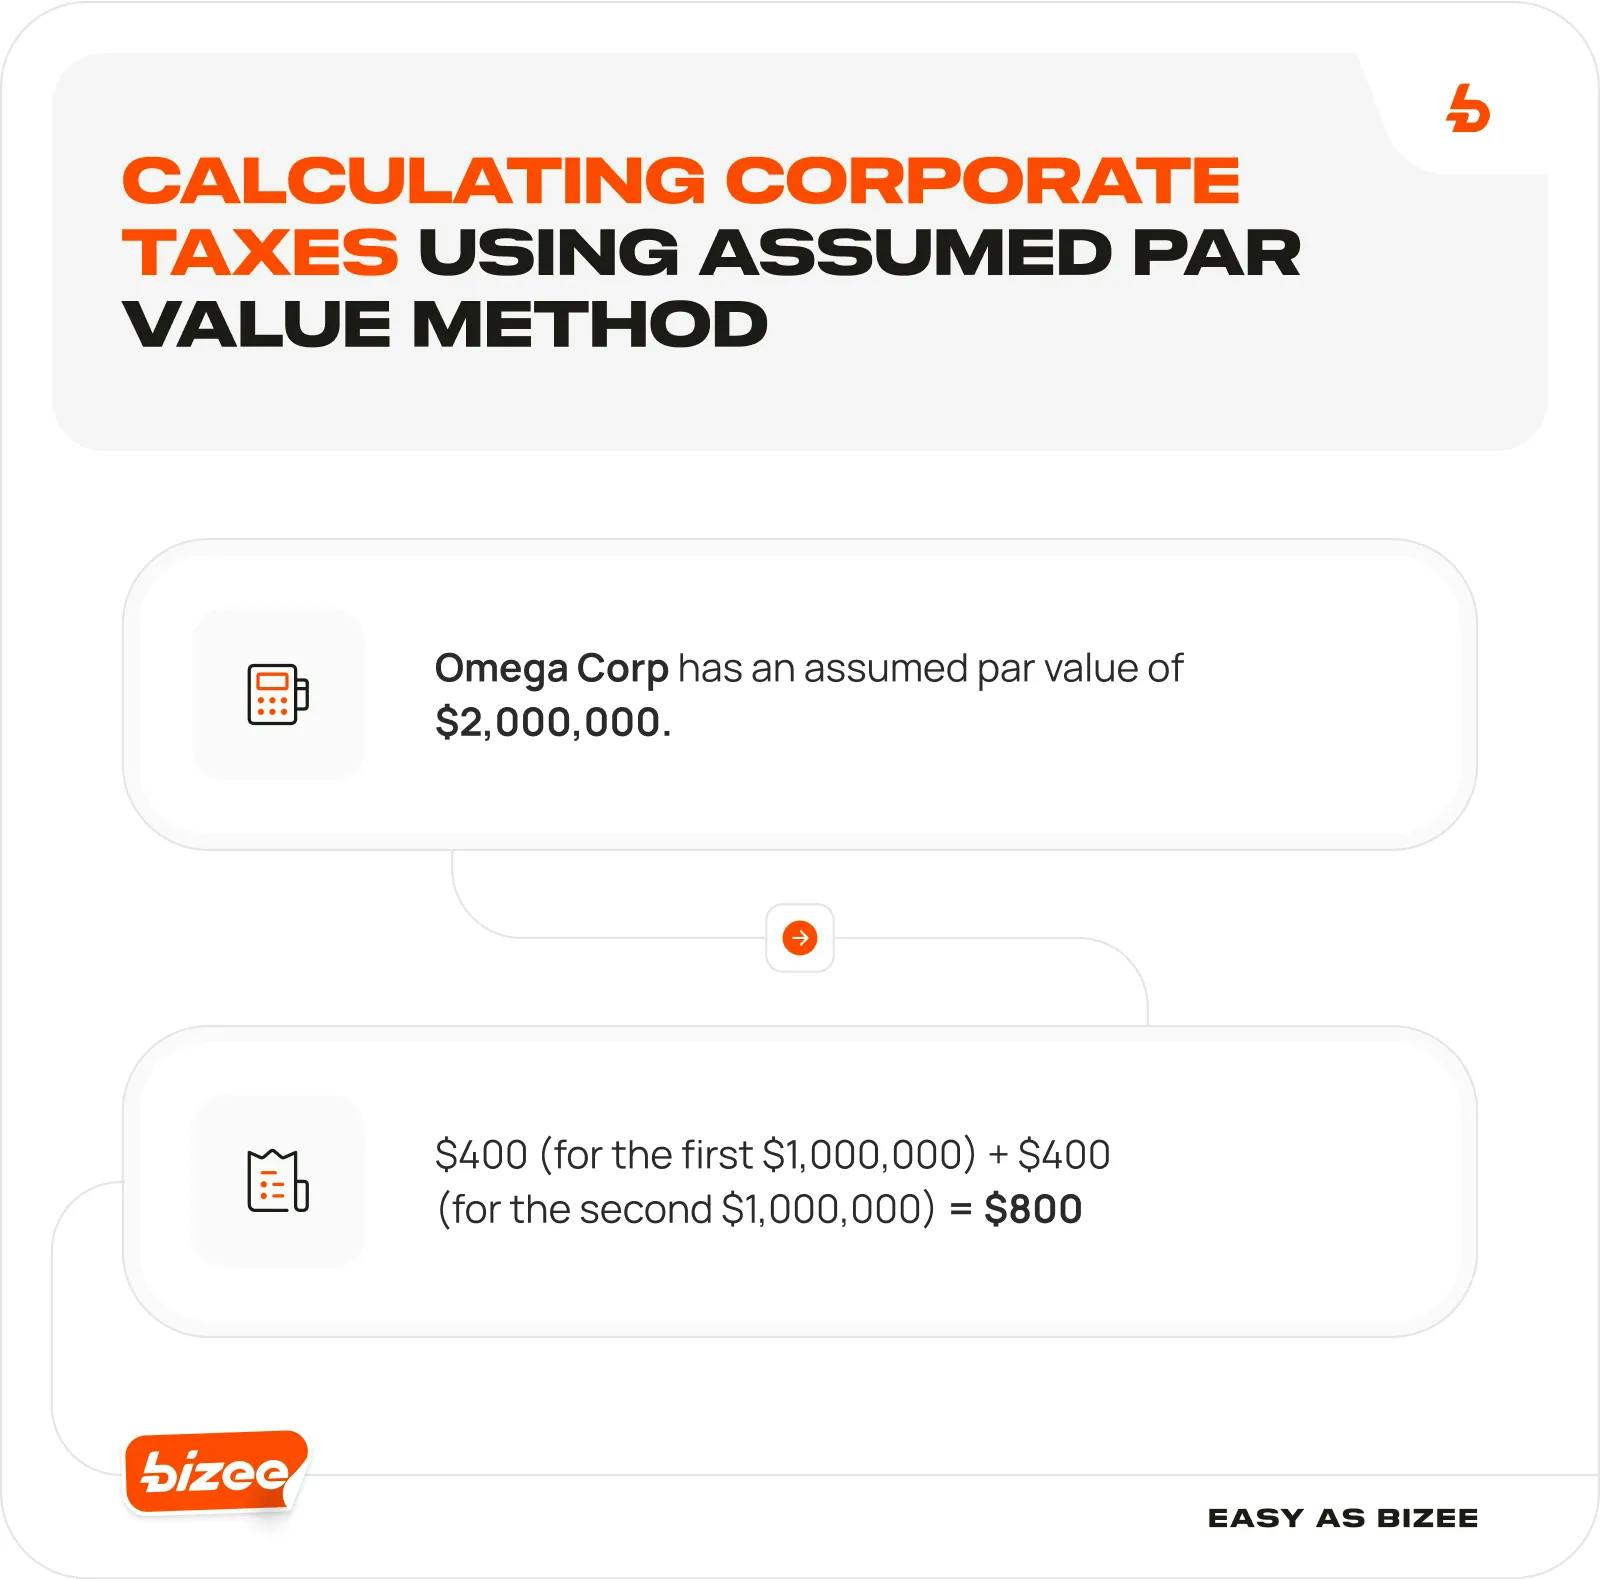 Calculating Corporate Taxes Using Assumed Par Value Method